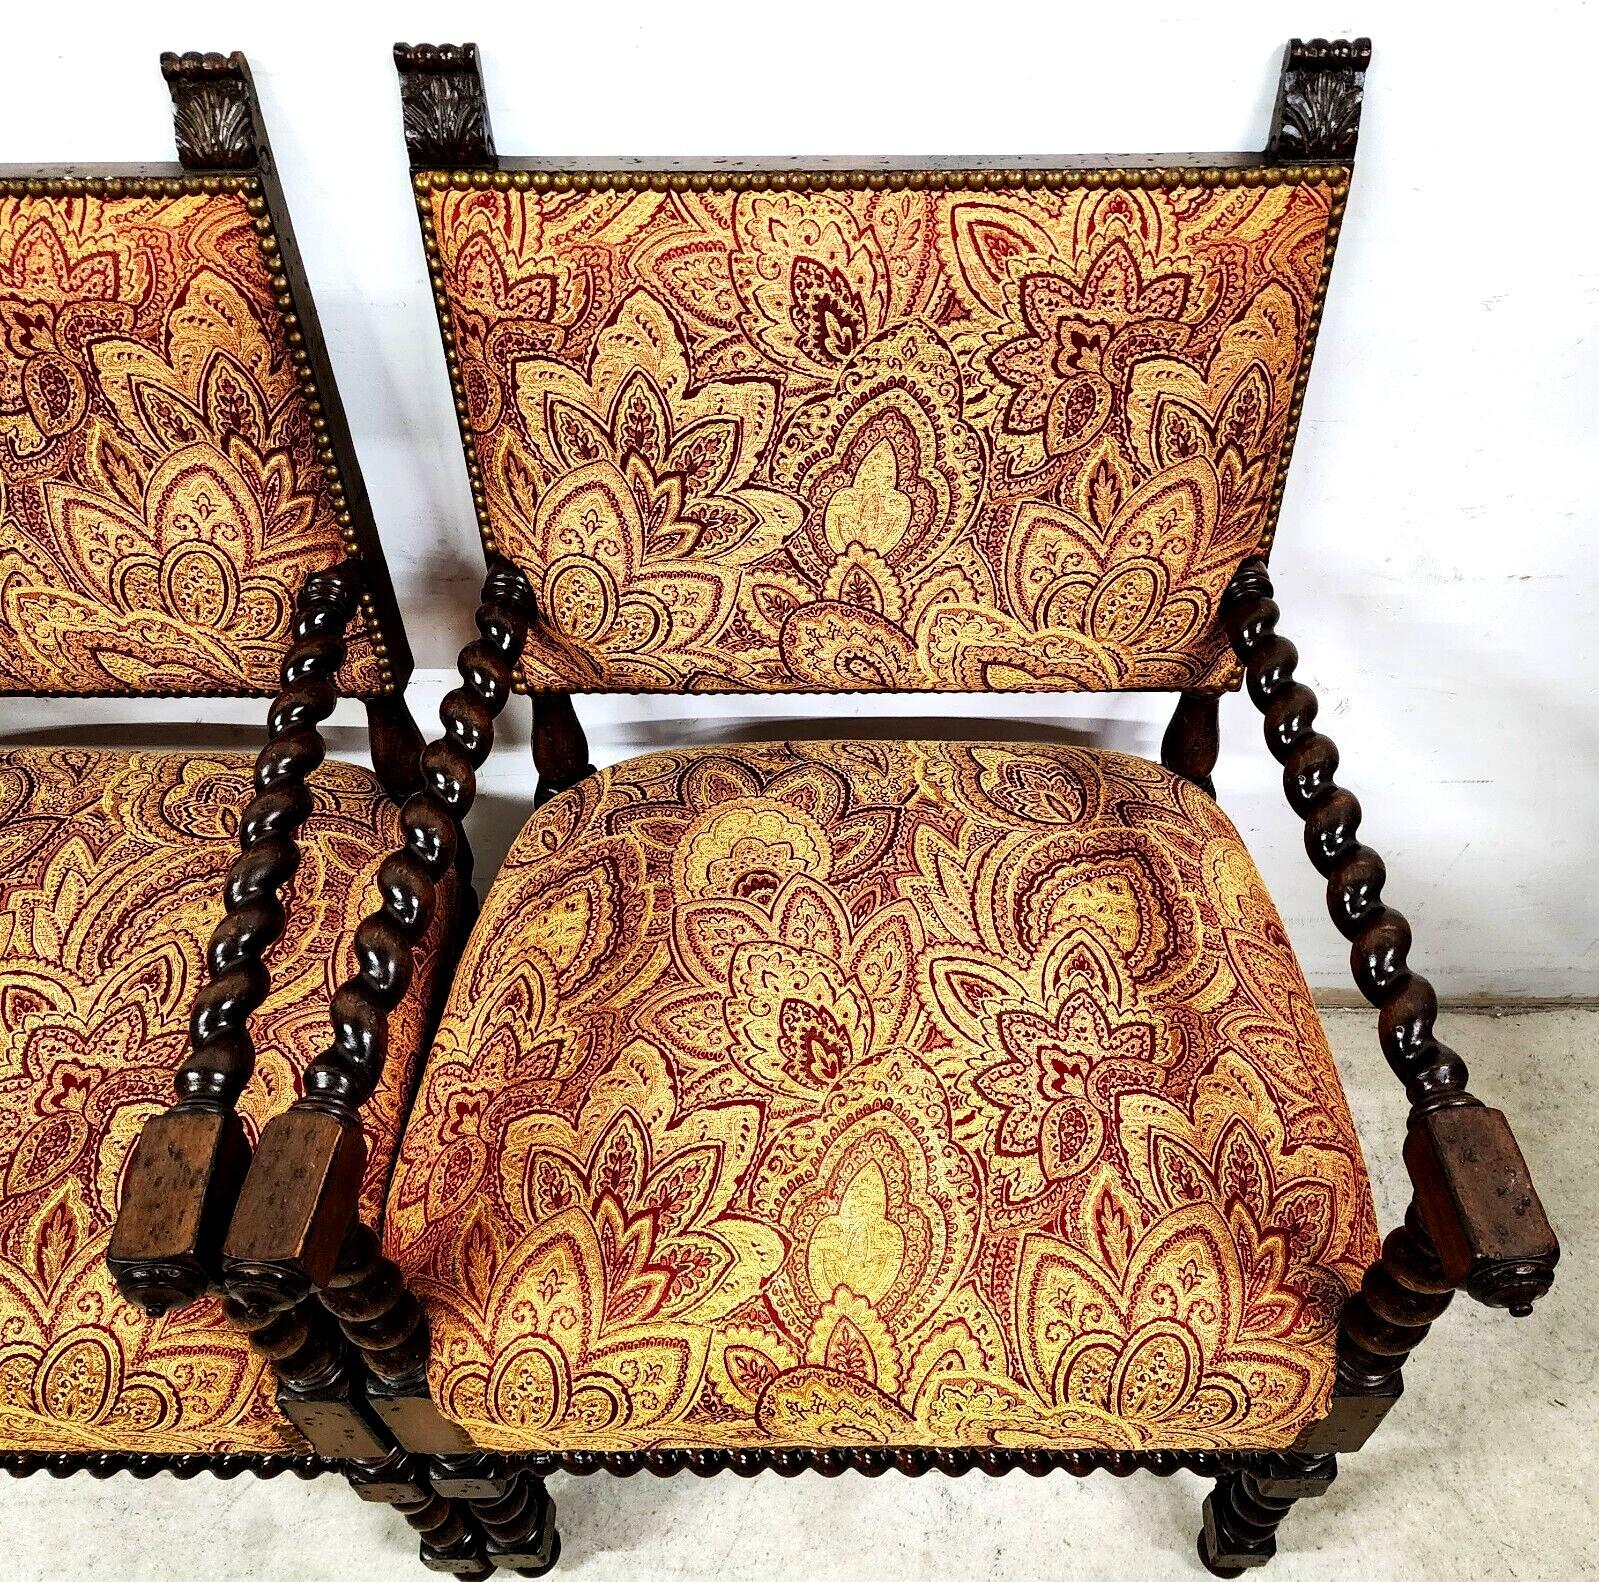 Spanish Colonial Spanish Revival Armchairs Antique Set of 2 For Sale